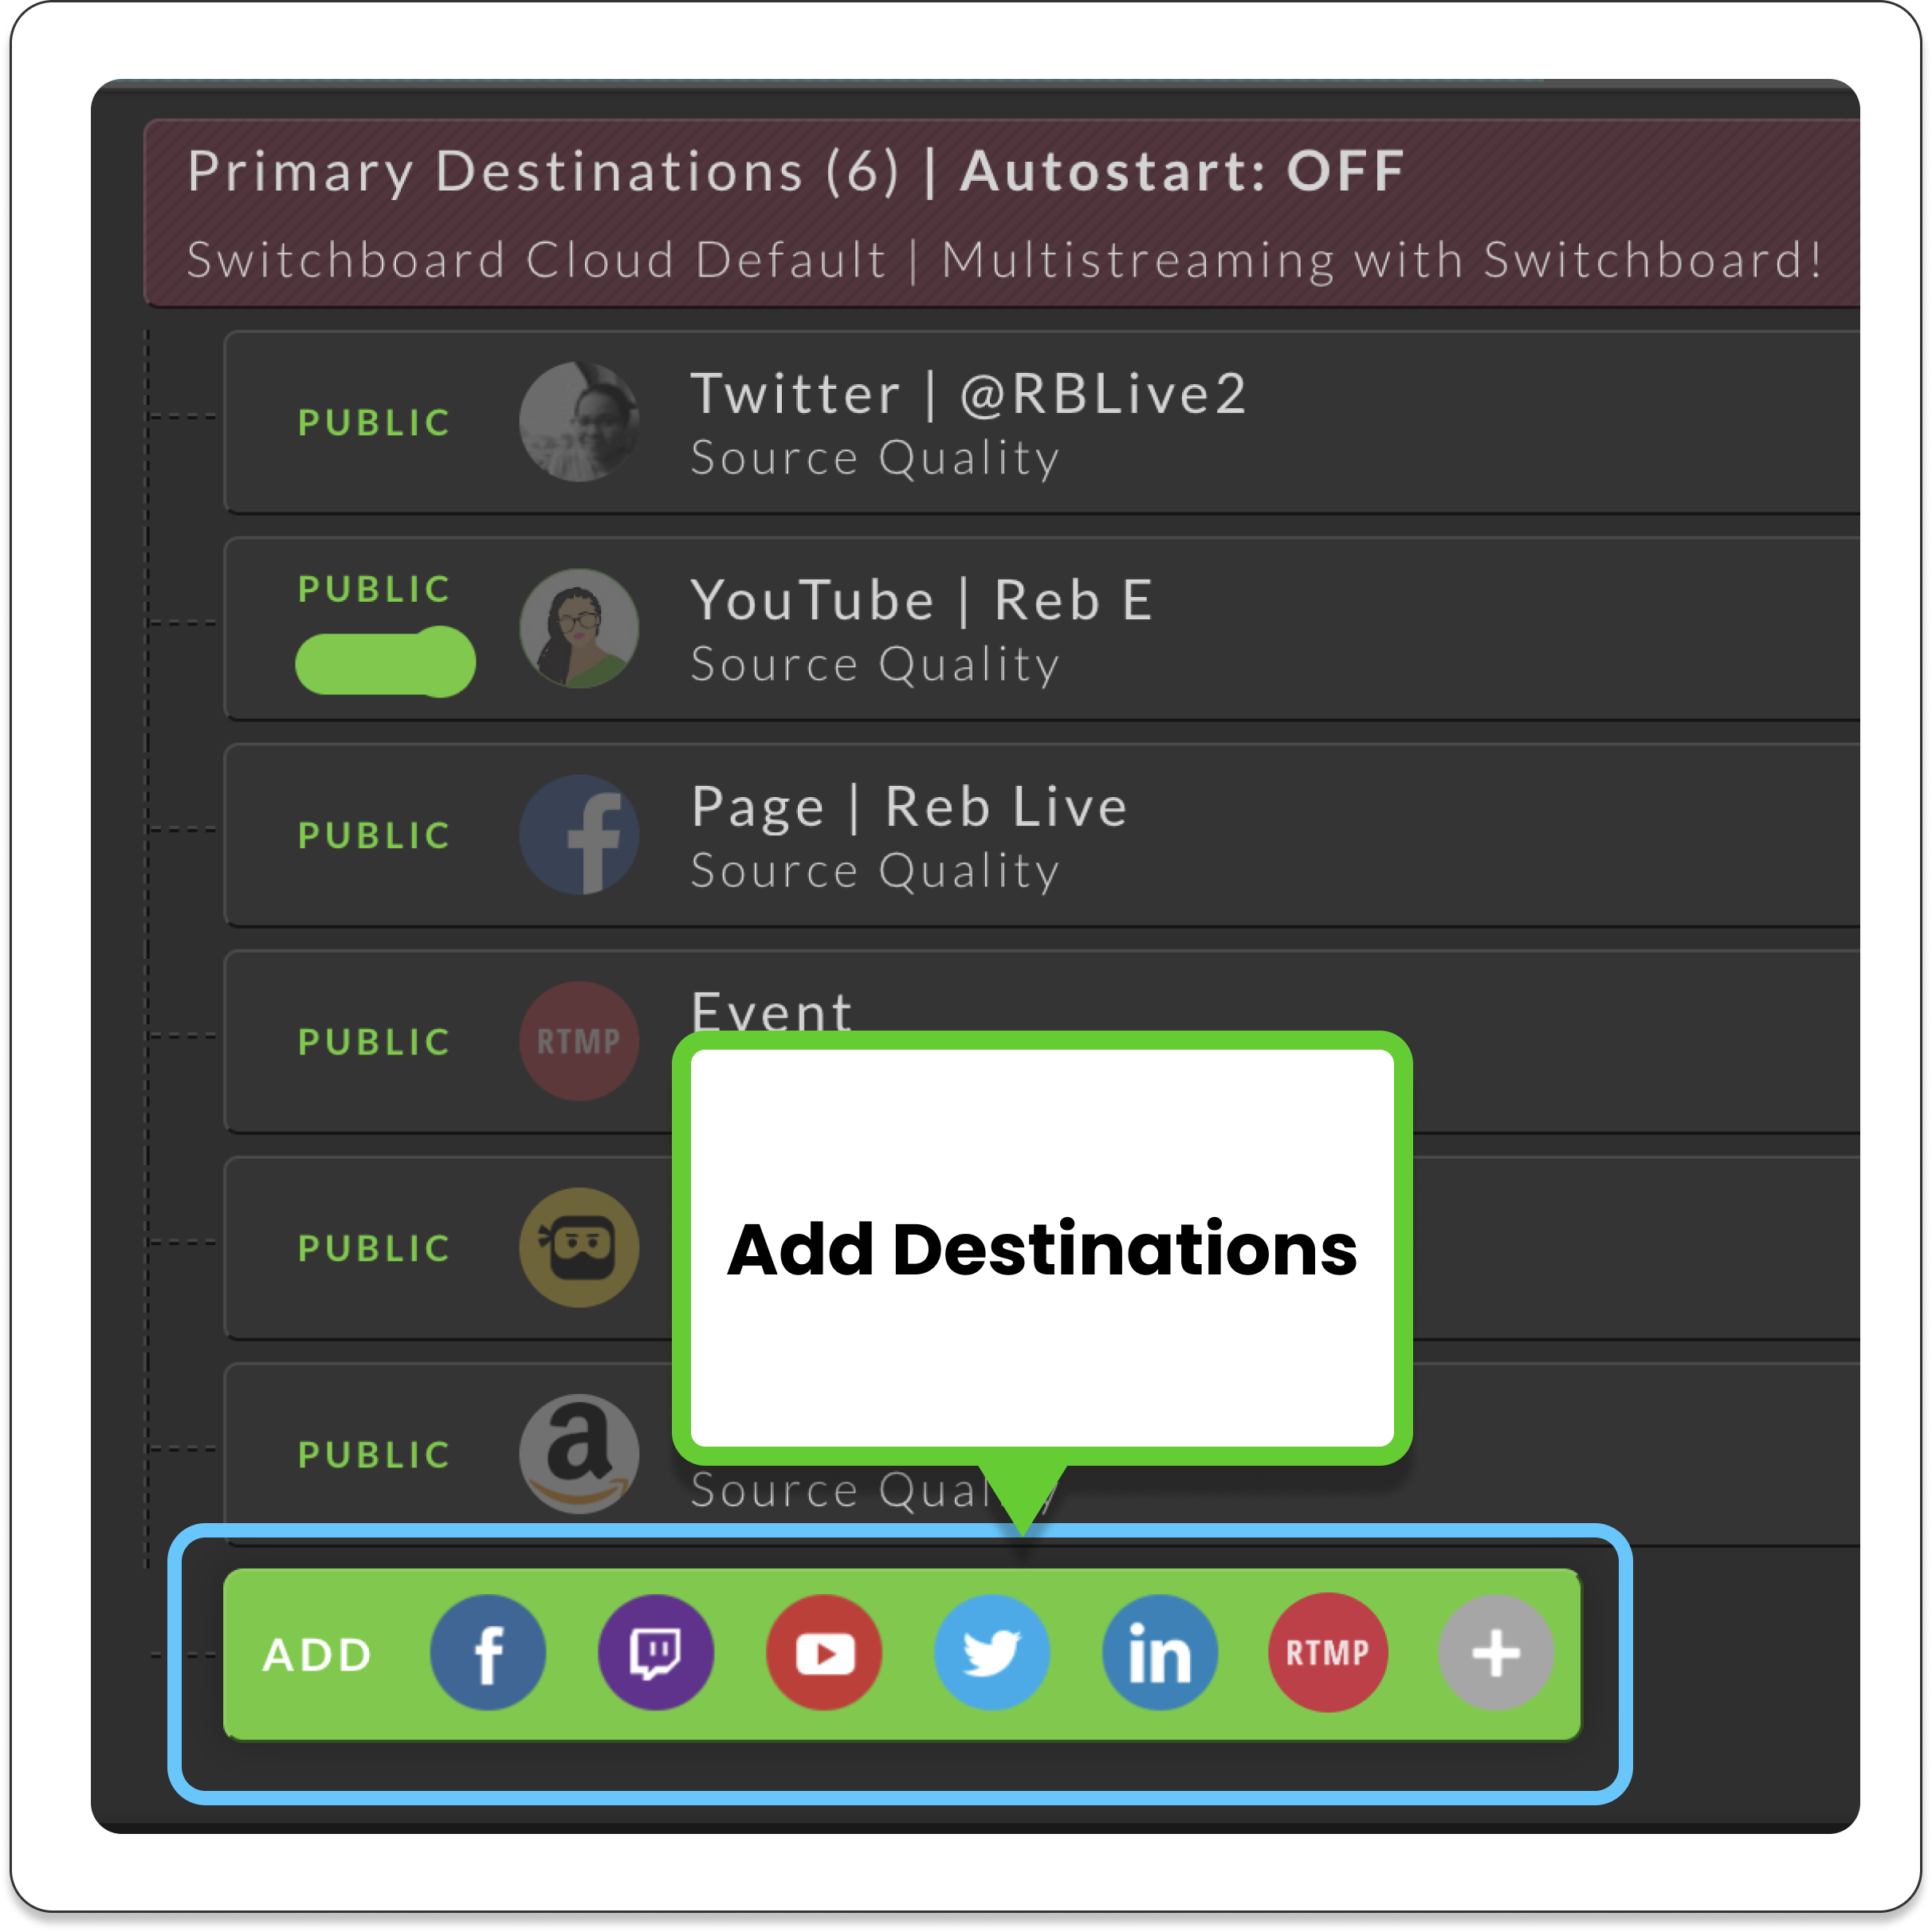 switchboardlive_workflow-page_destinations_pane_add_destination_green_bar.png